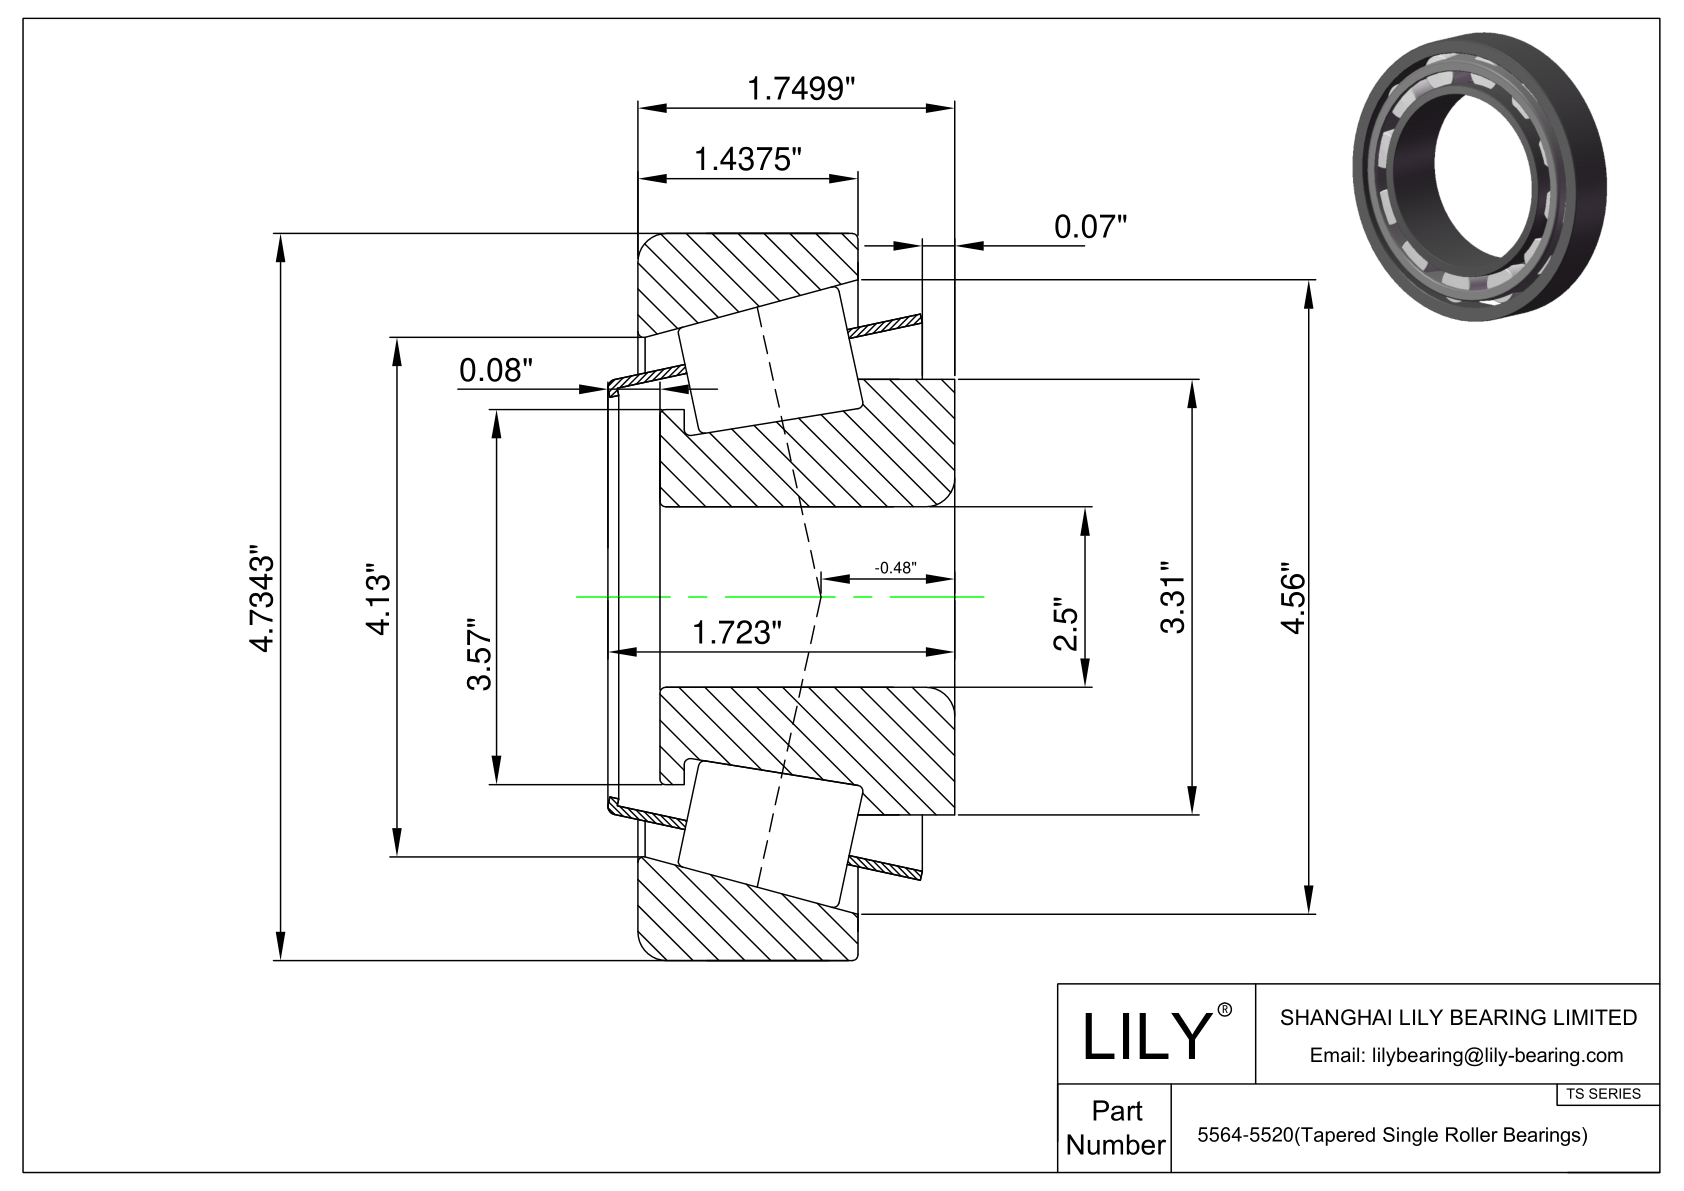 5564-5520 TS (Tapered Single Roller Bearings) (Imperial) cad drawing